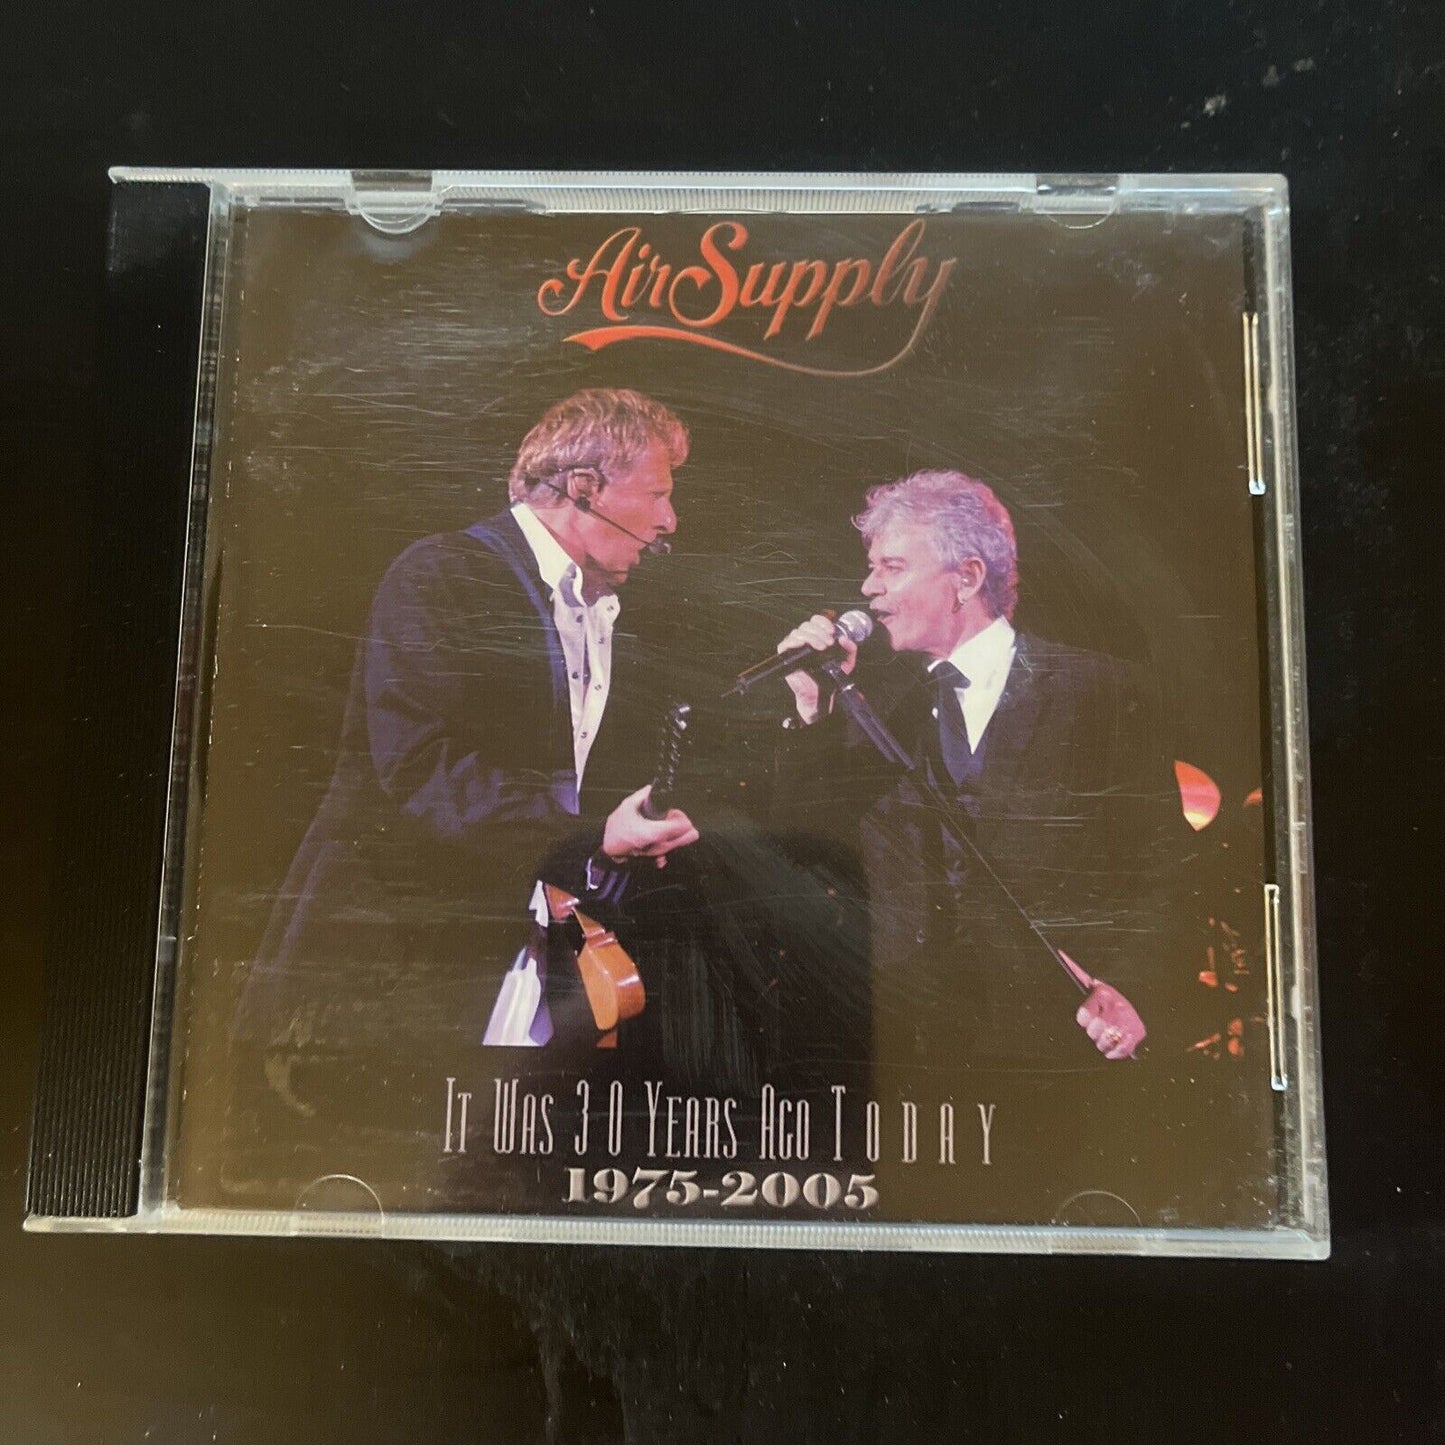 Air Supply - It Was 30 Years Ago Today (1975-2005) (CD, 2005)